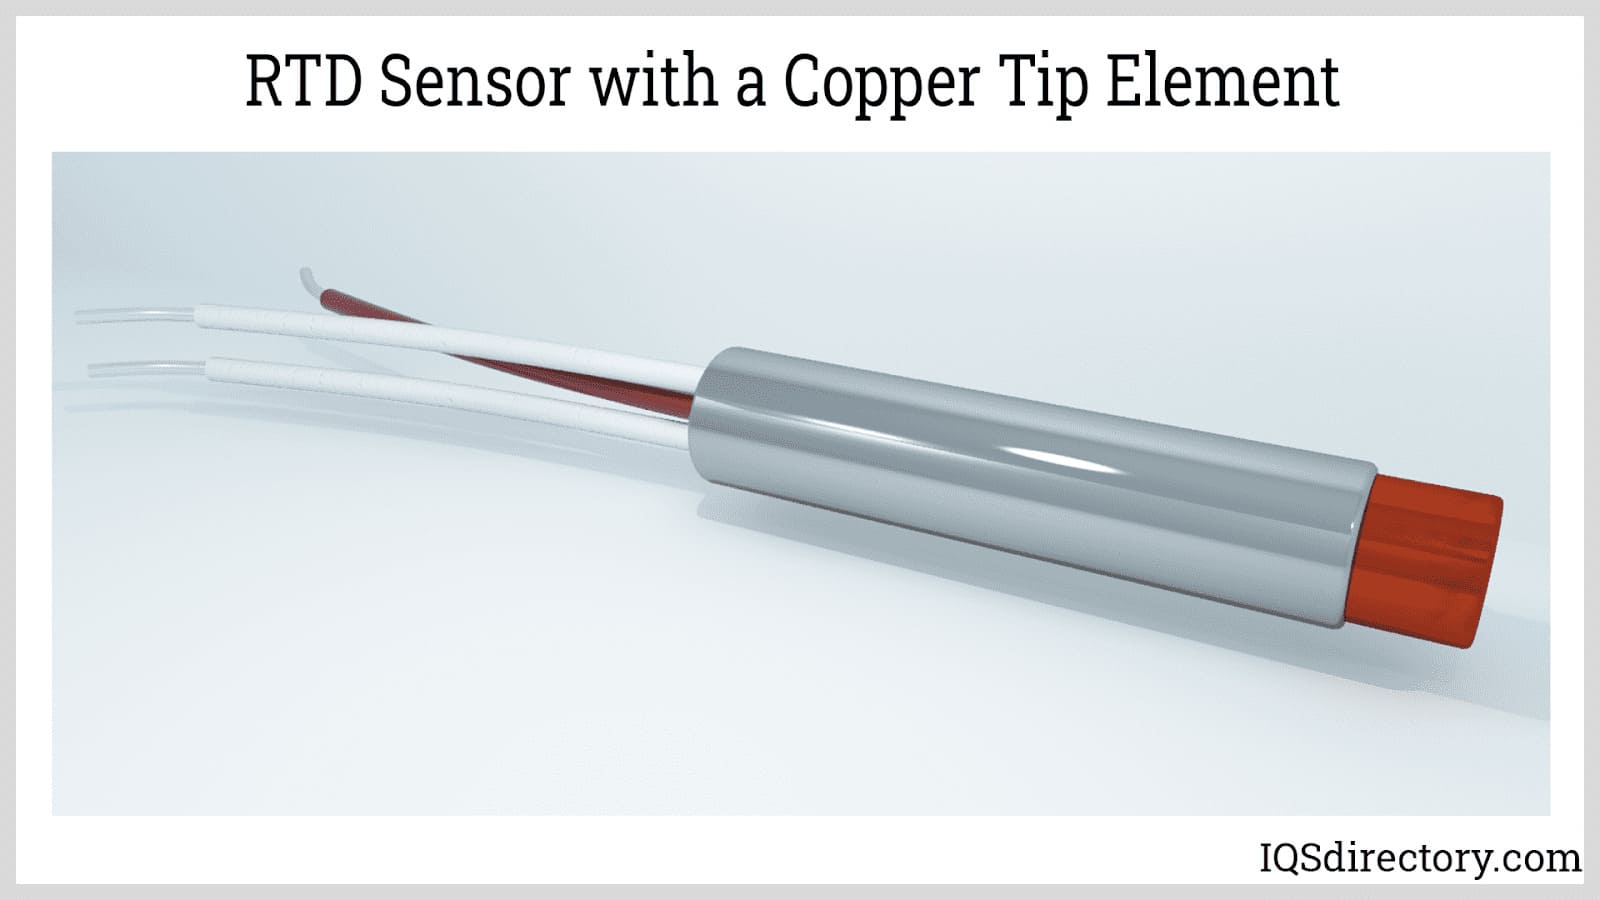 https://www.iqsdirectory.com/articles/thermocouple/rtd-sensors/rtd-sensor-with-copper-tip-element.jpg